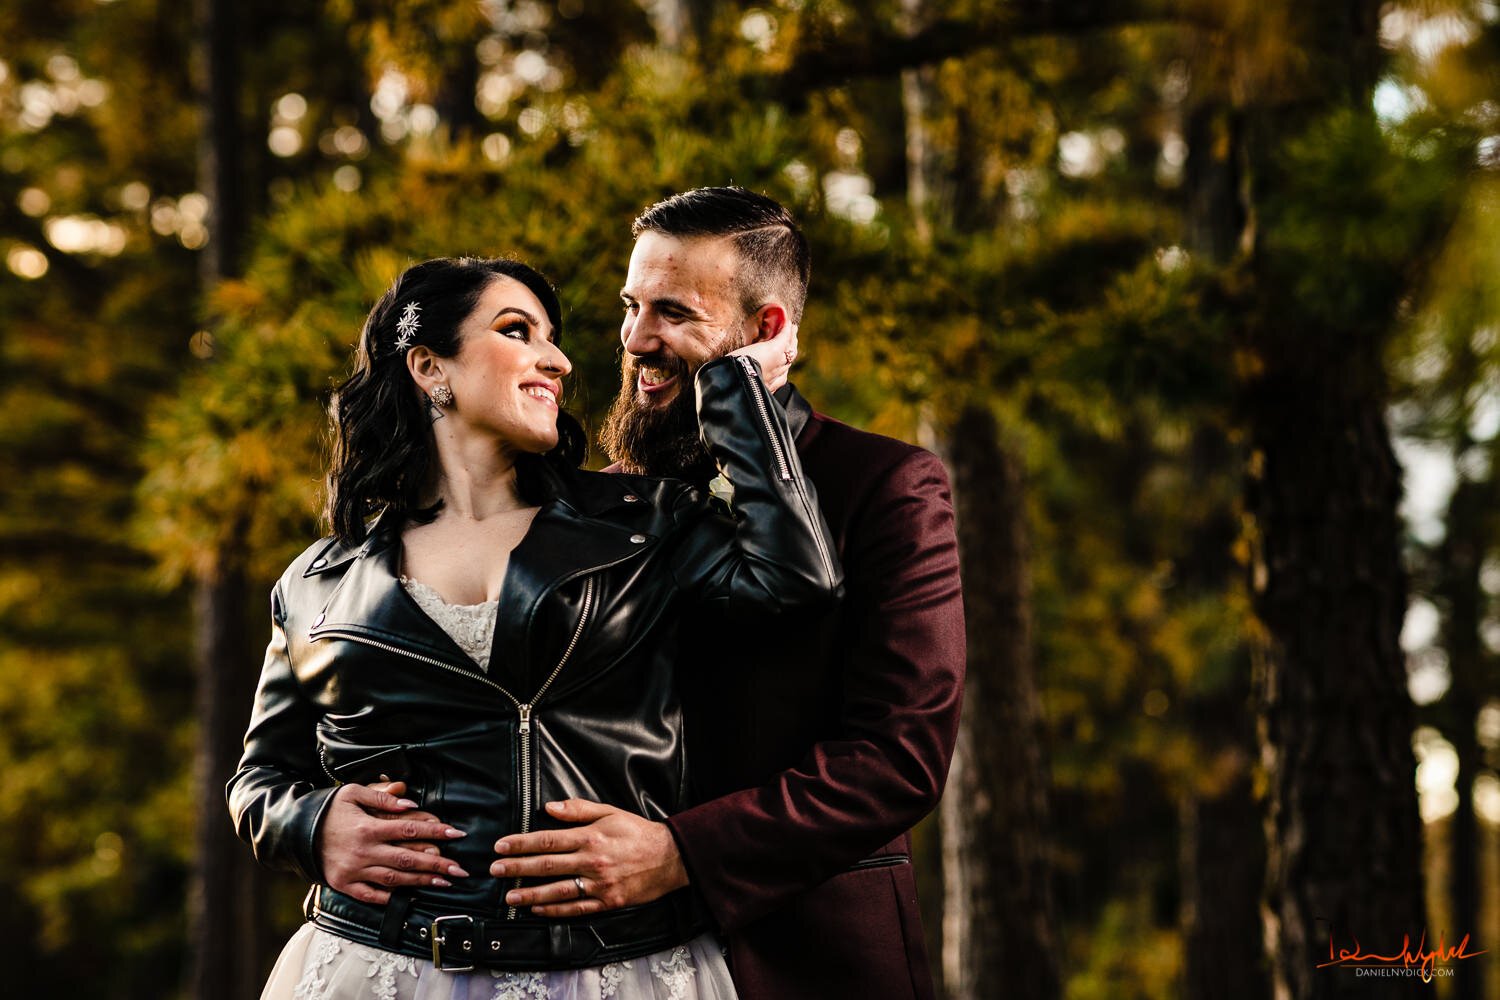 nj pinup goth bride in leather jacket poortrait with smiling gro